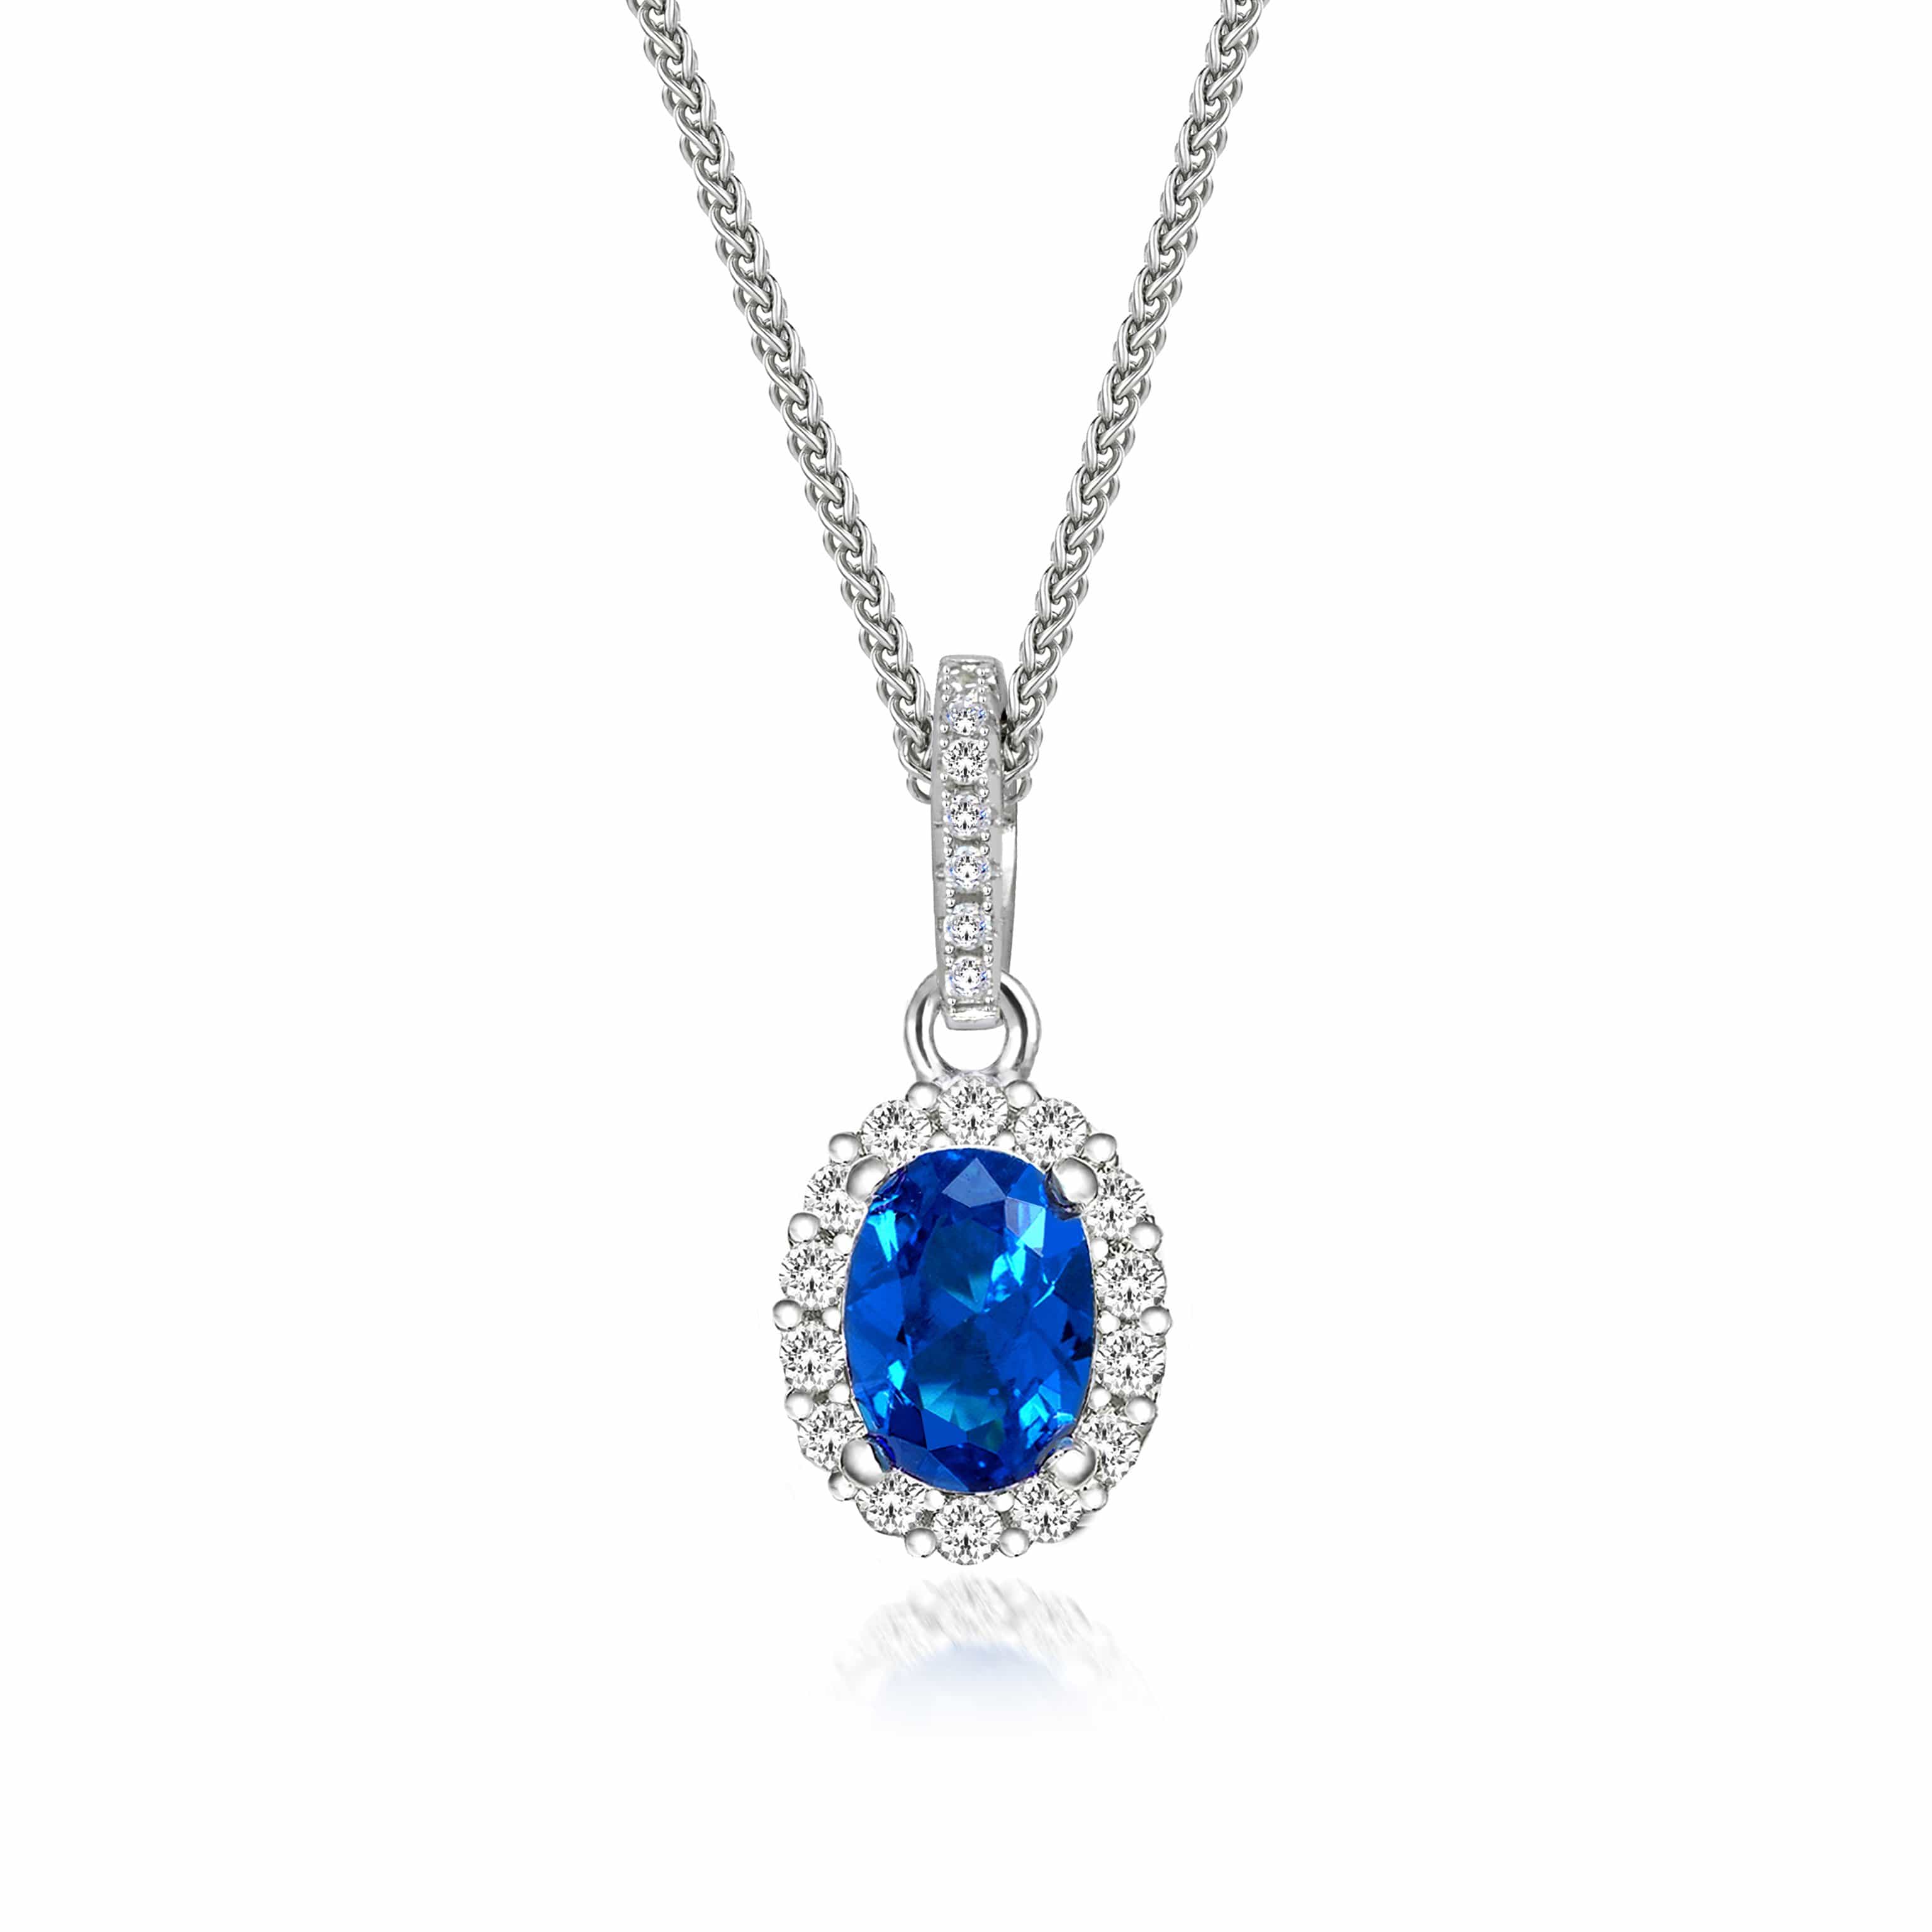 Lynora Jewellery Necklace  Sapphire  Sterling Silver & Sapphire Stone